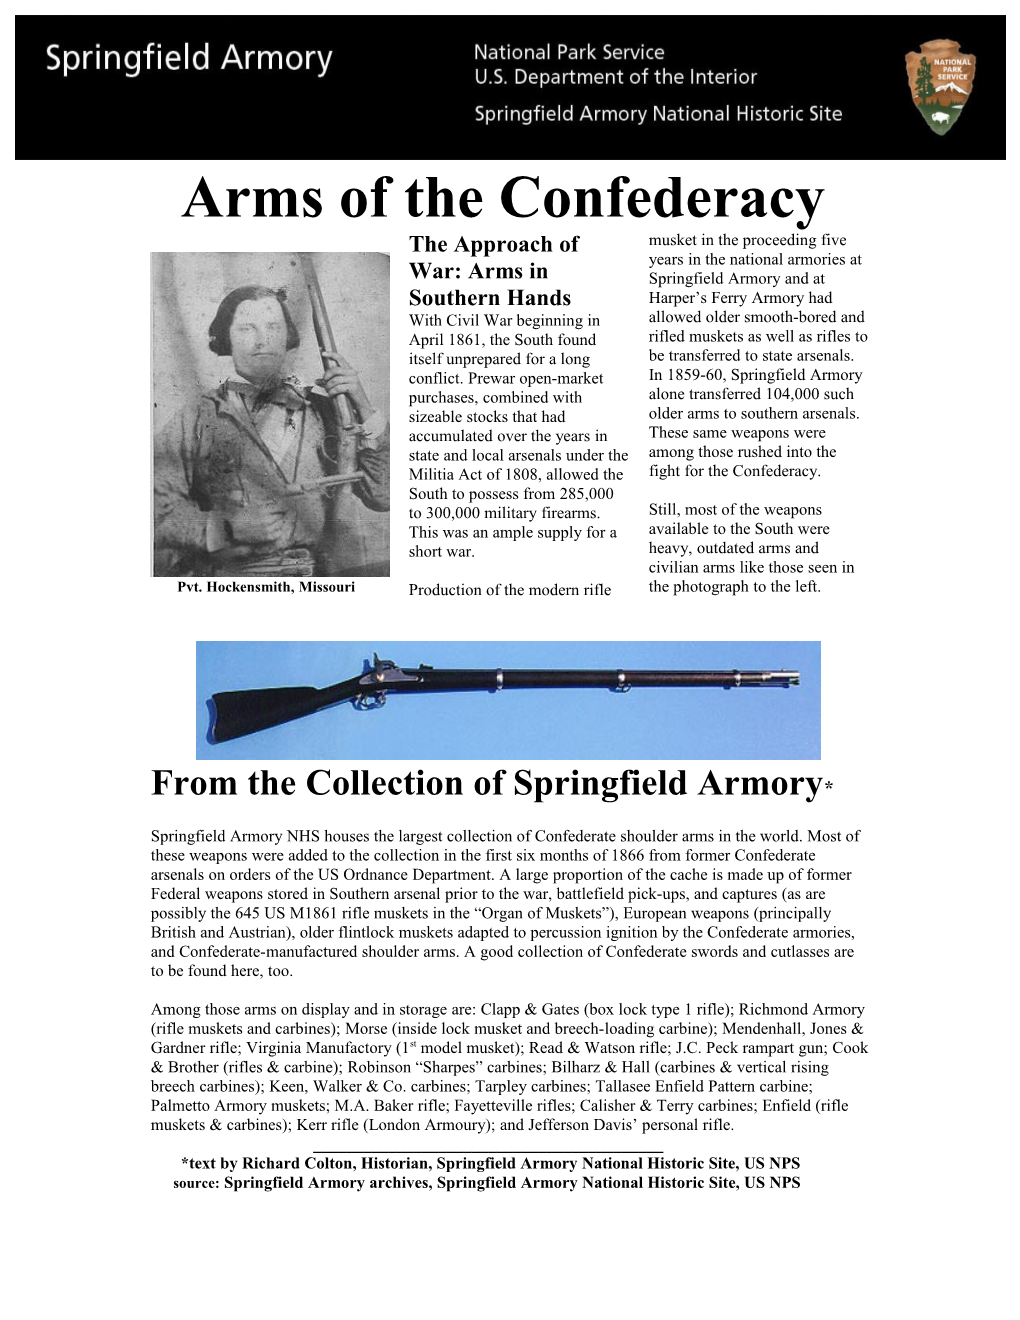 Arms of the Confederacy